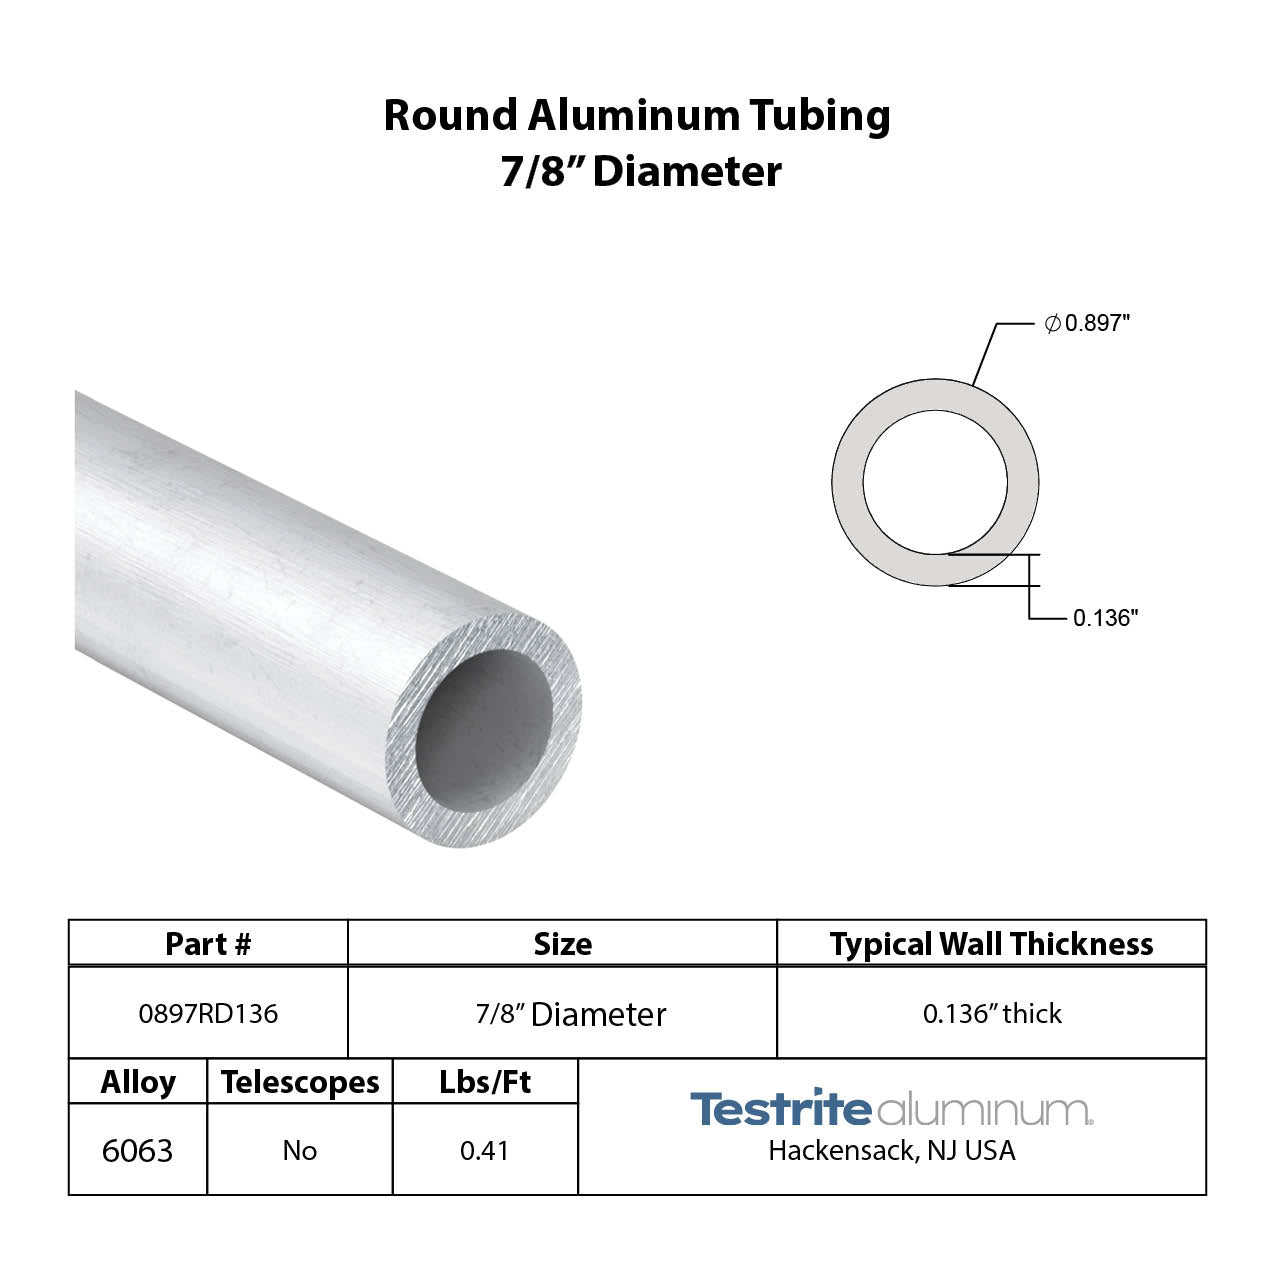 Spec sheet for approximately 0.875" x .125" Aluminum Round Tube, actual size 0.897" Diameter x .136" Wall, essentially a 7/8" x 1/8" Wall round aluminum tube, spec card includes lbs per ft